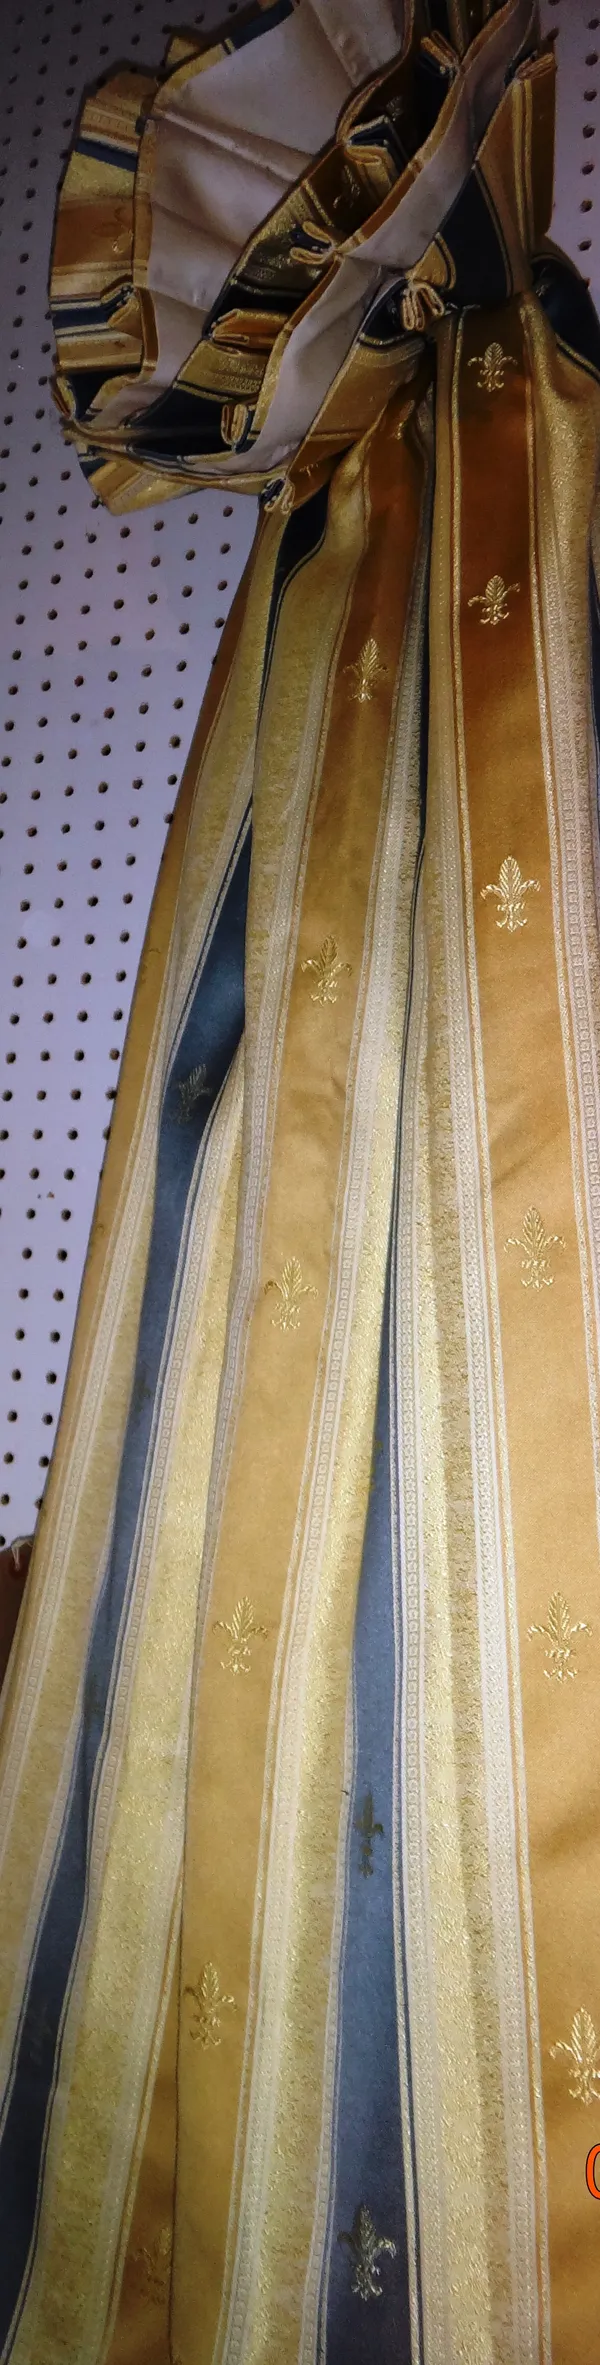 Curtains, comprising; a pair of gold and blue striped curtains with Fleur-de-lys and triple pleats, lined, each 178cm wide x 142cm fall.   M9